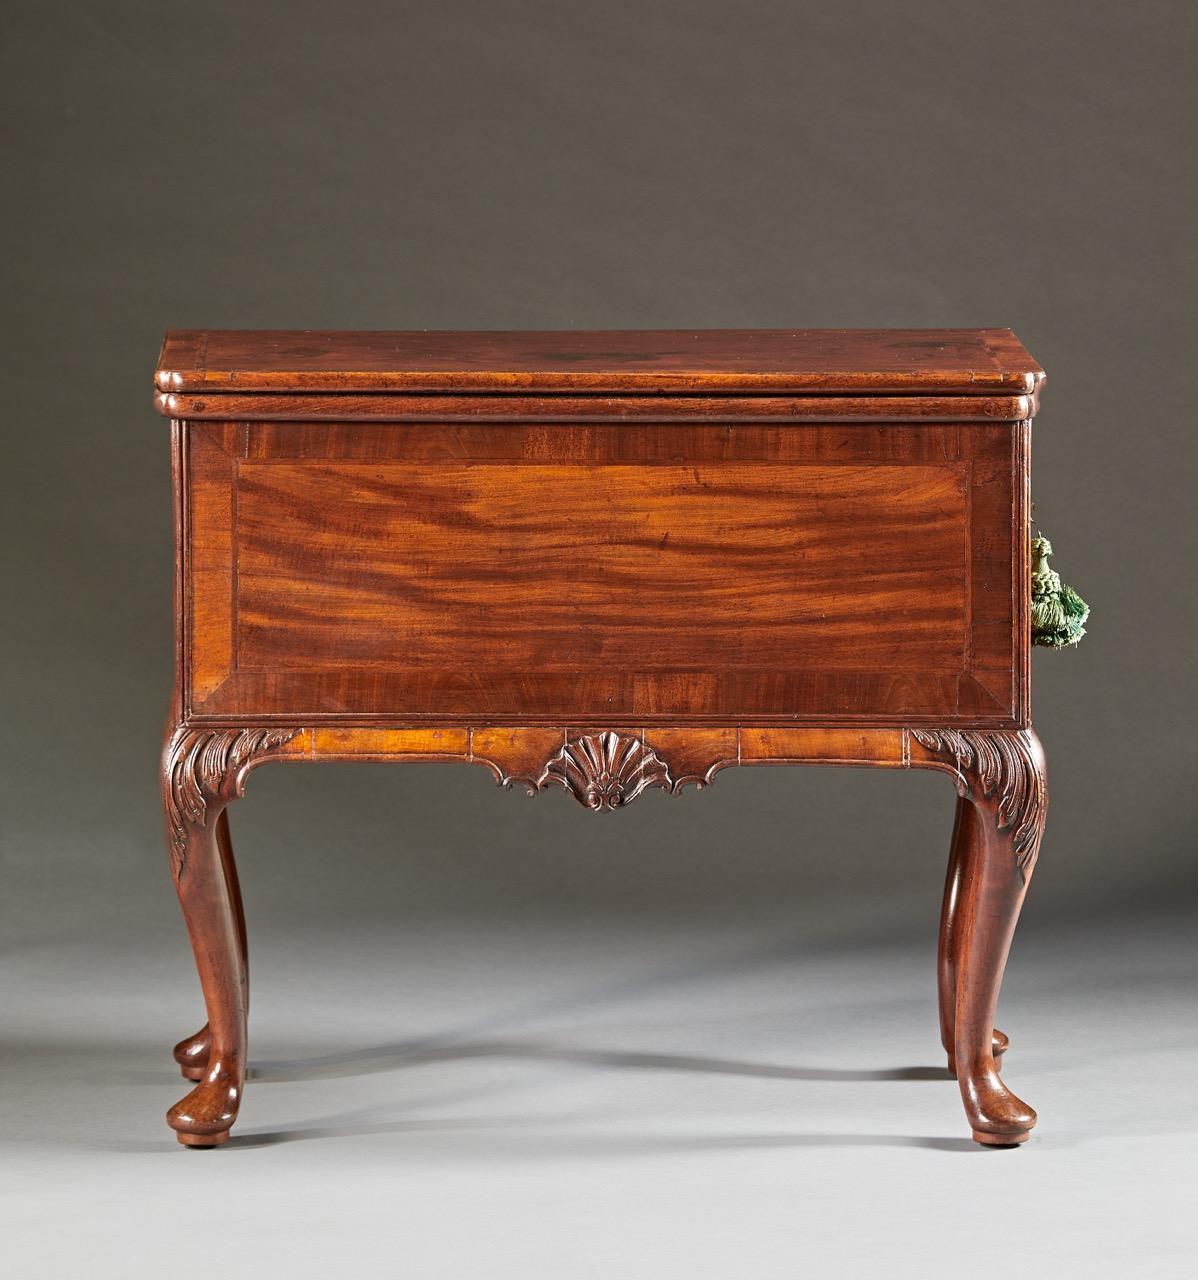 A very fine George II mahogany counting table, the rectangular folding top opening to a ratcheted writing/drawing tablet with crossbanded edging on a conforming case with applied bulged apron. The case is fitted with working drawers and is finished